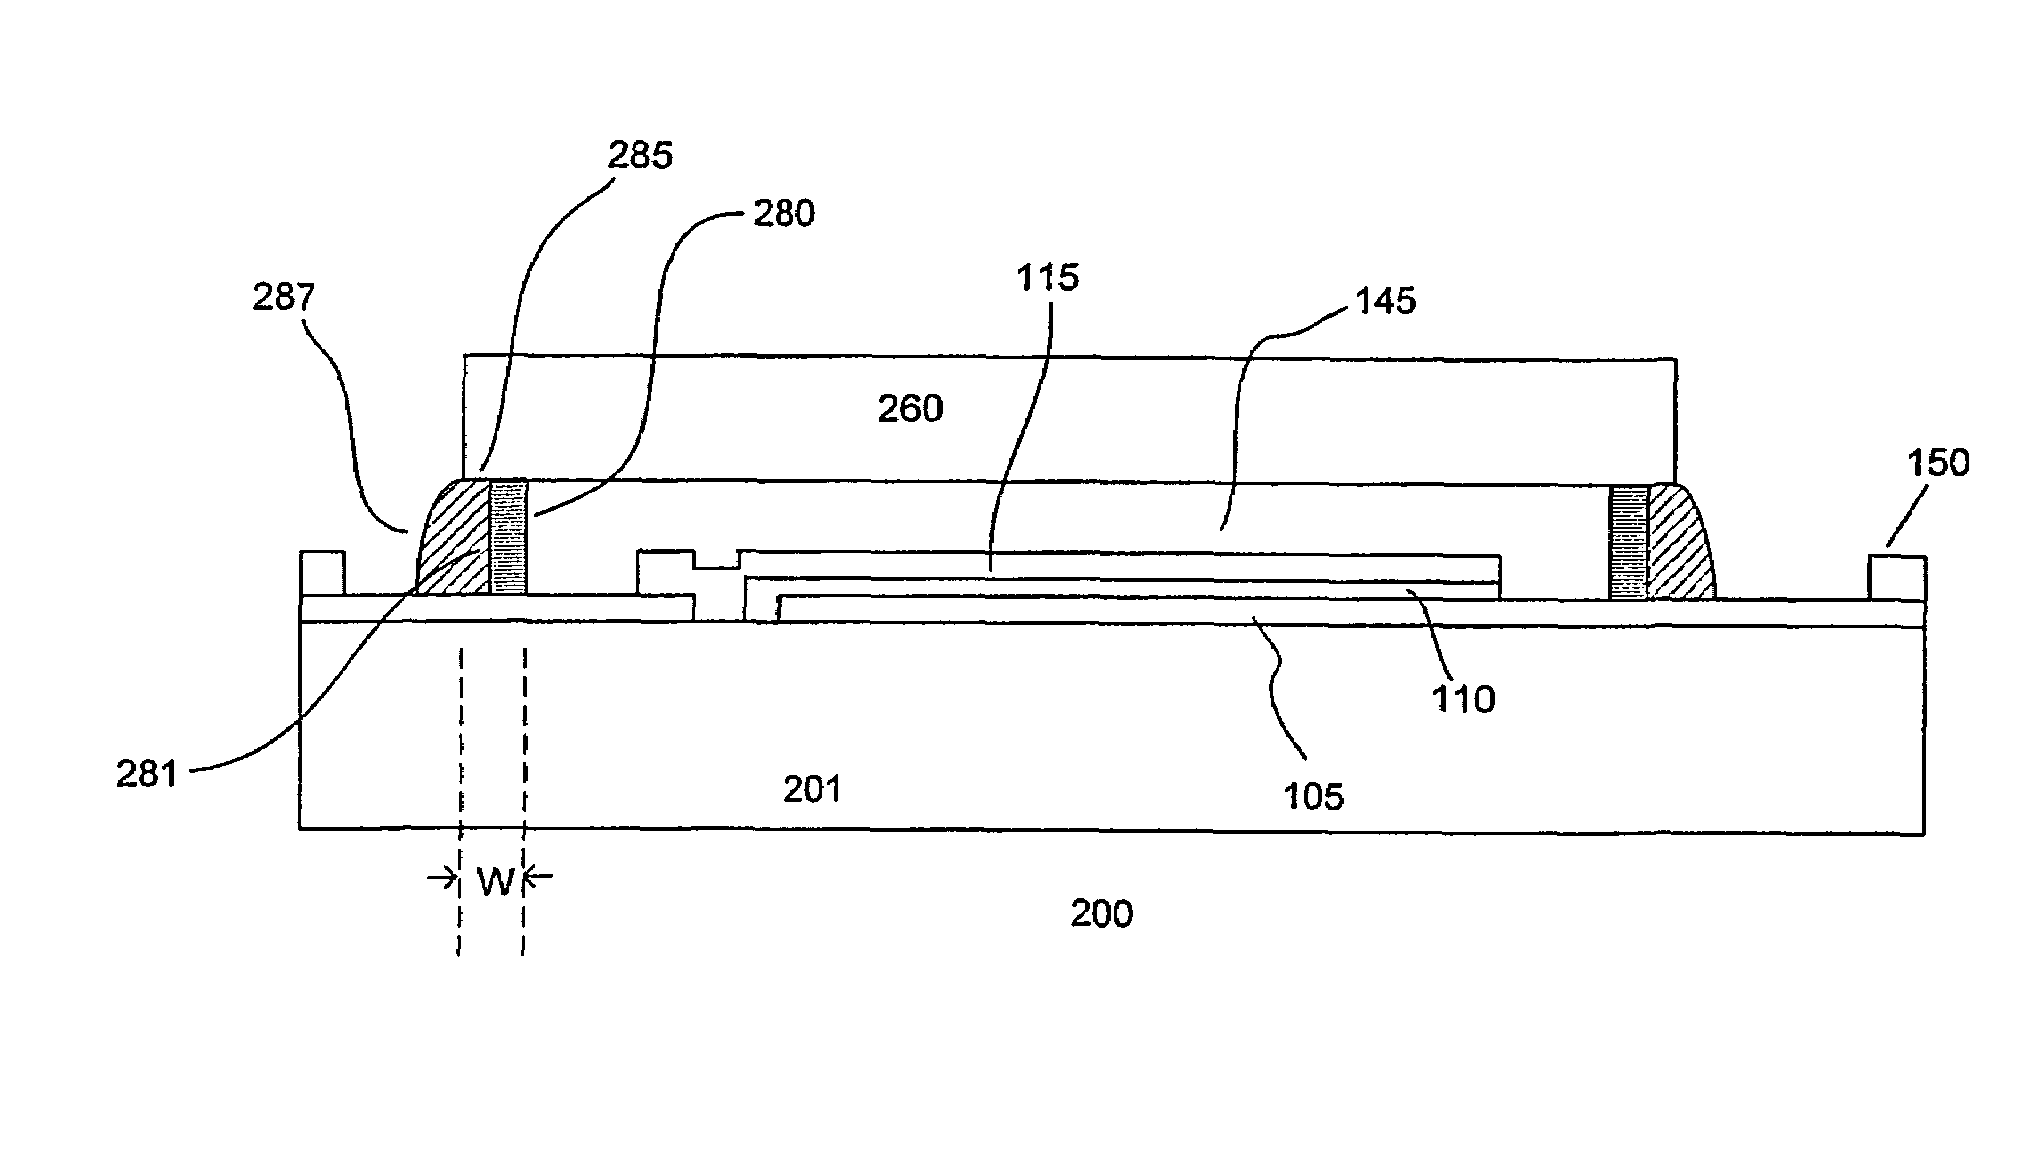 Encapsulation for oled devices